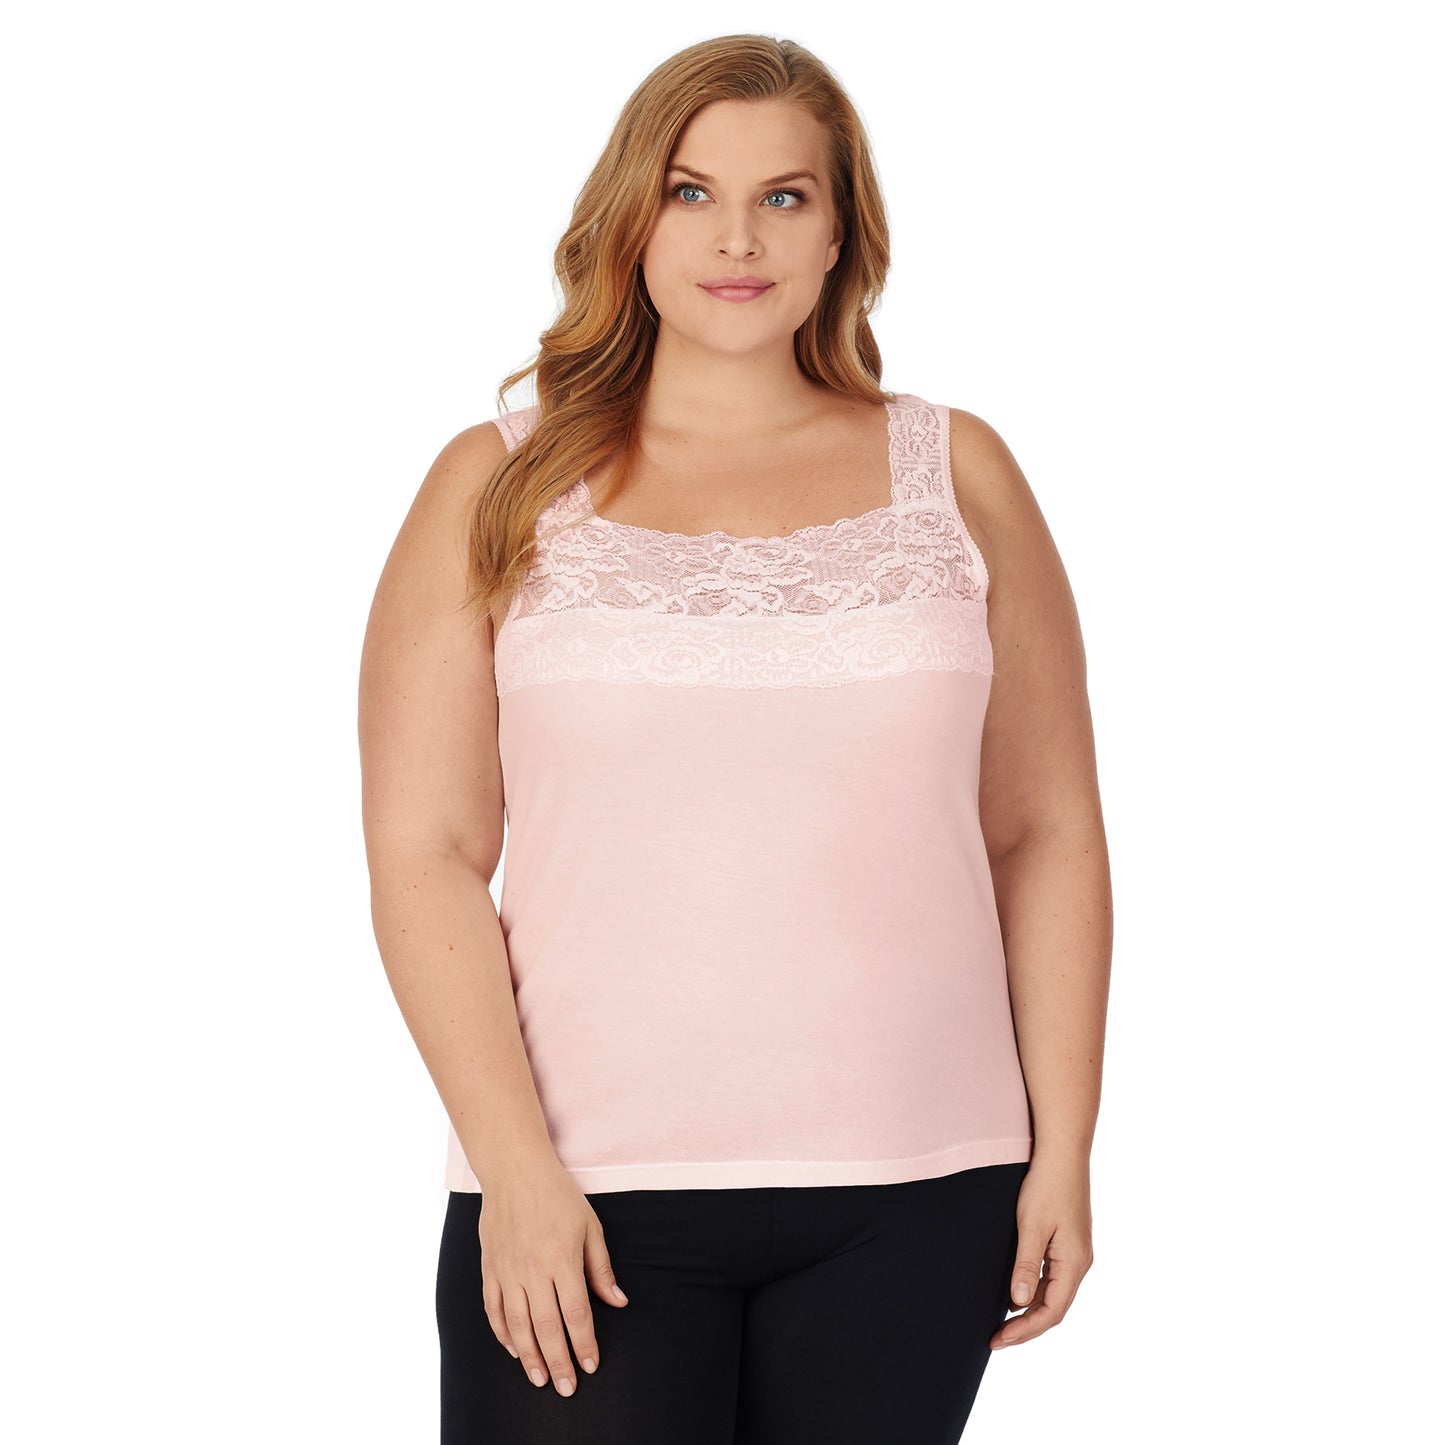 Soft pink; Model is wearing size 1x. She is 5'9", Bust 38", Waist 36", Hips 48.5". @A lady wearing soft pink lace cami